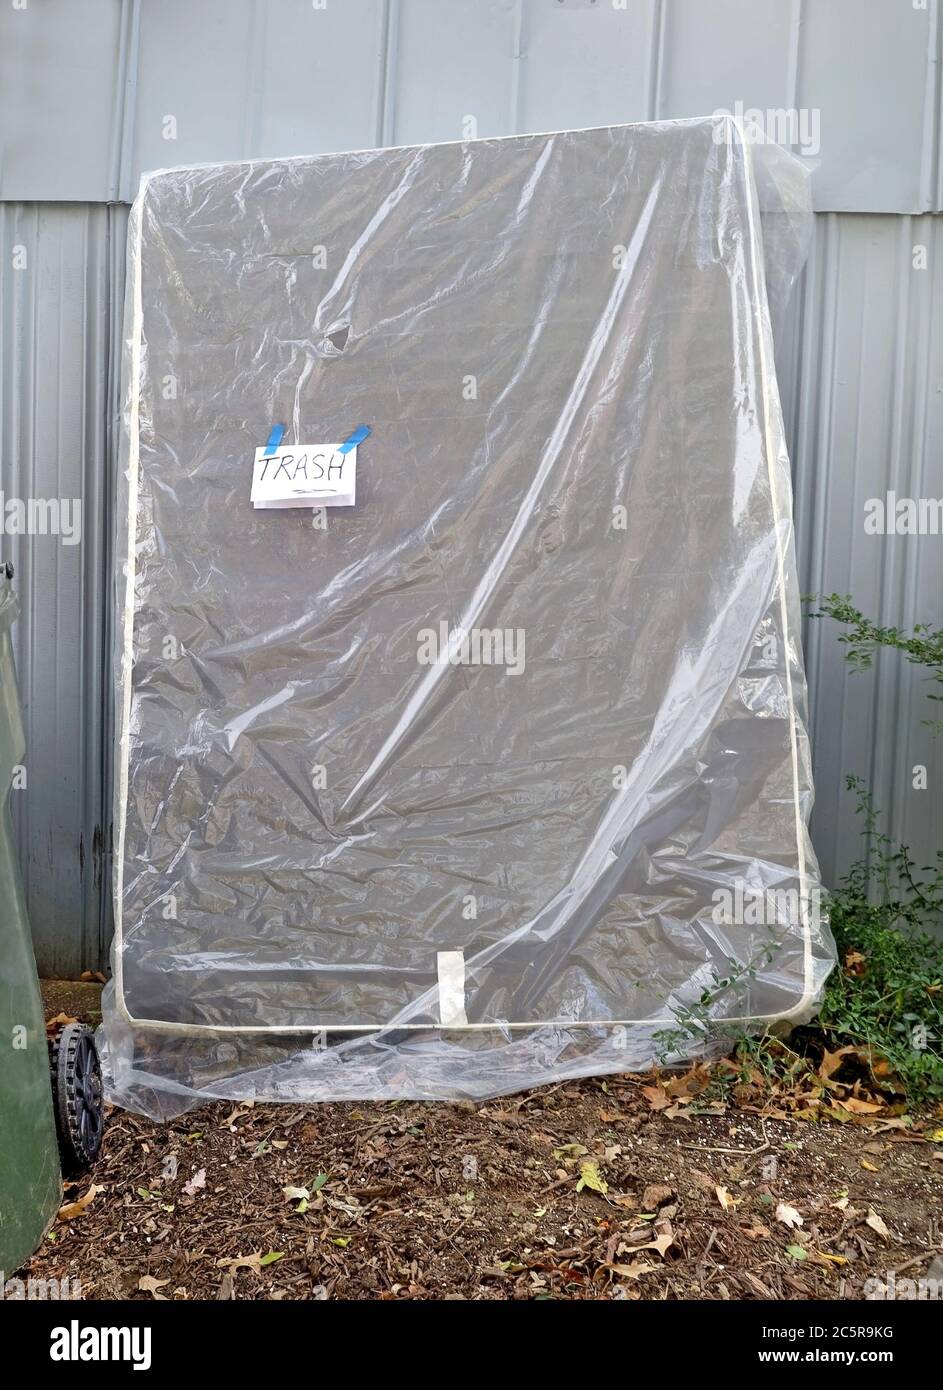 The proper way to dispose of used mattress. Abandoned mattress leaning against garage in alley wrapped in plastic with TRASH note attached. Stock Photo